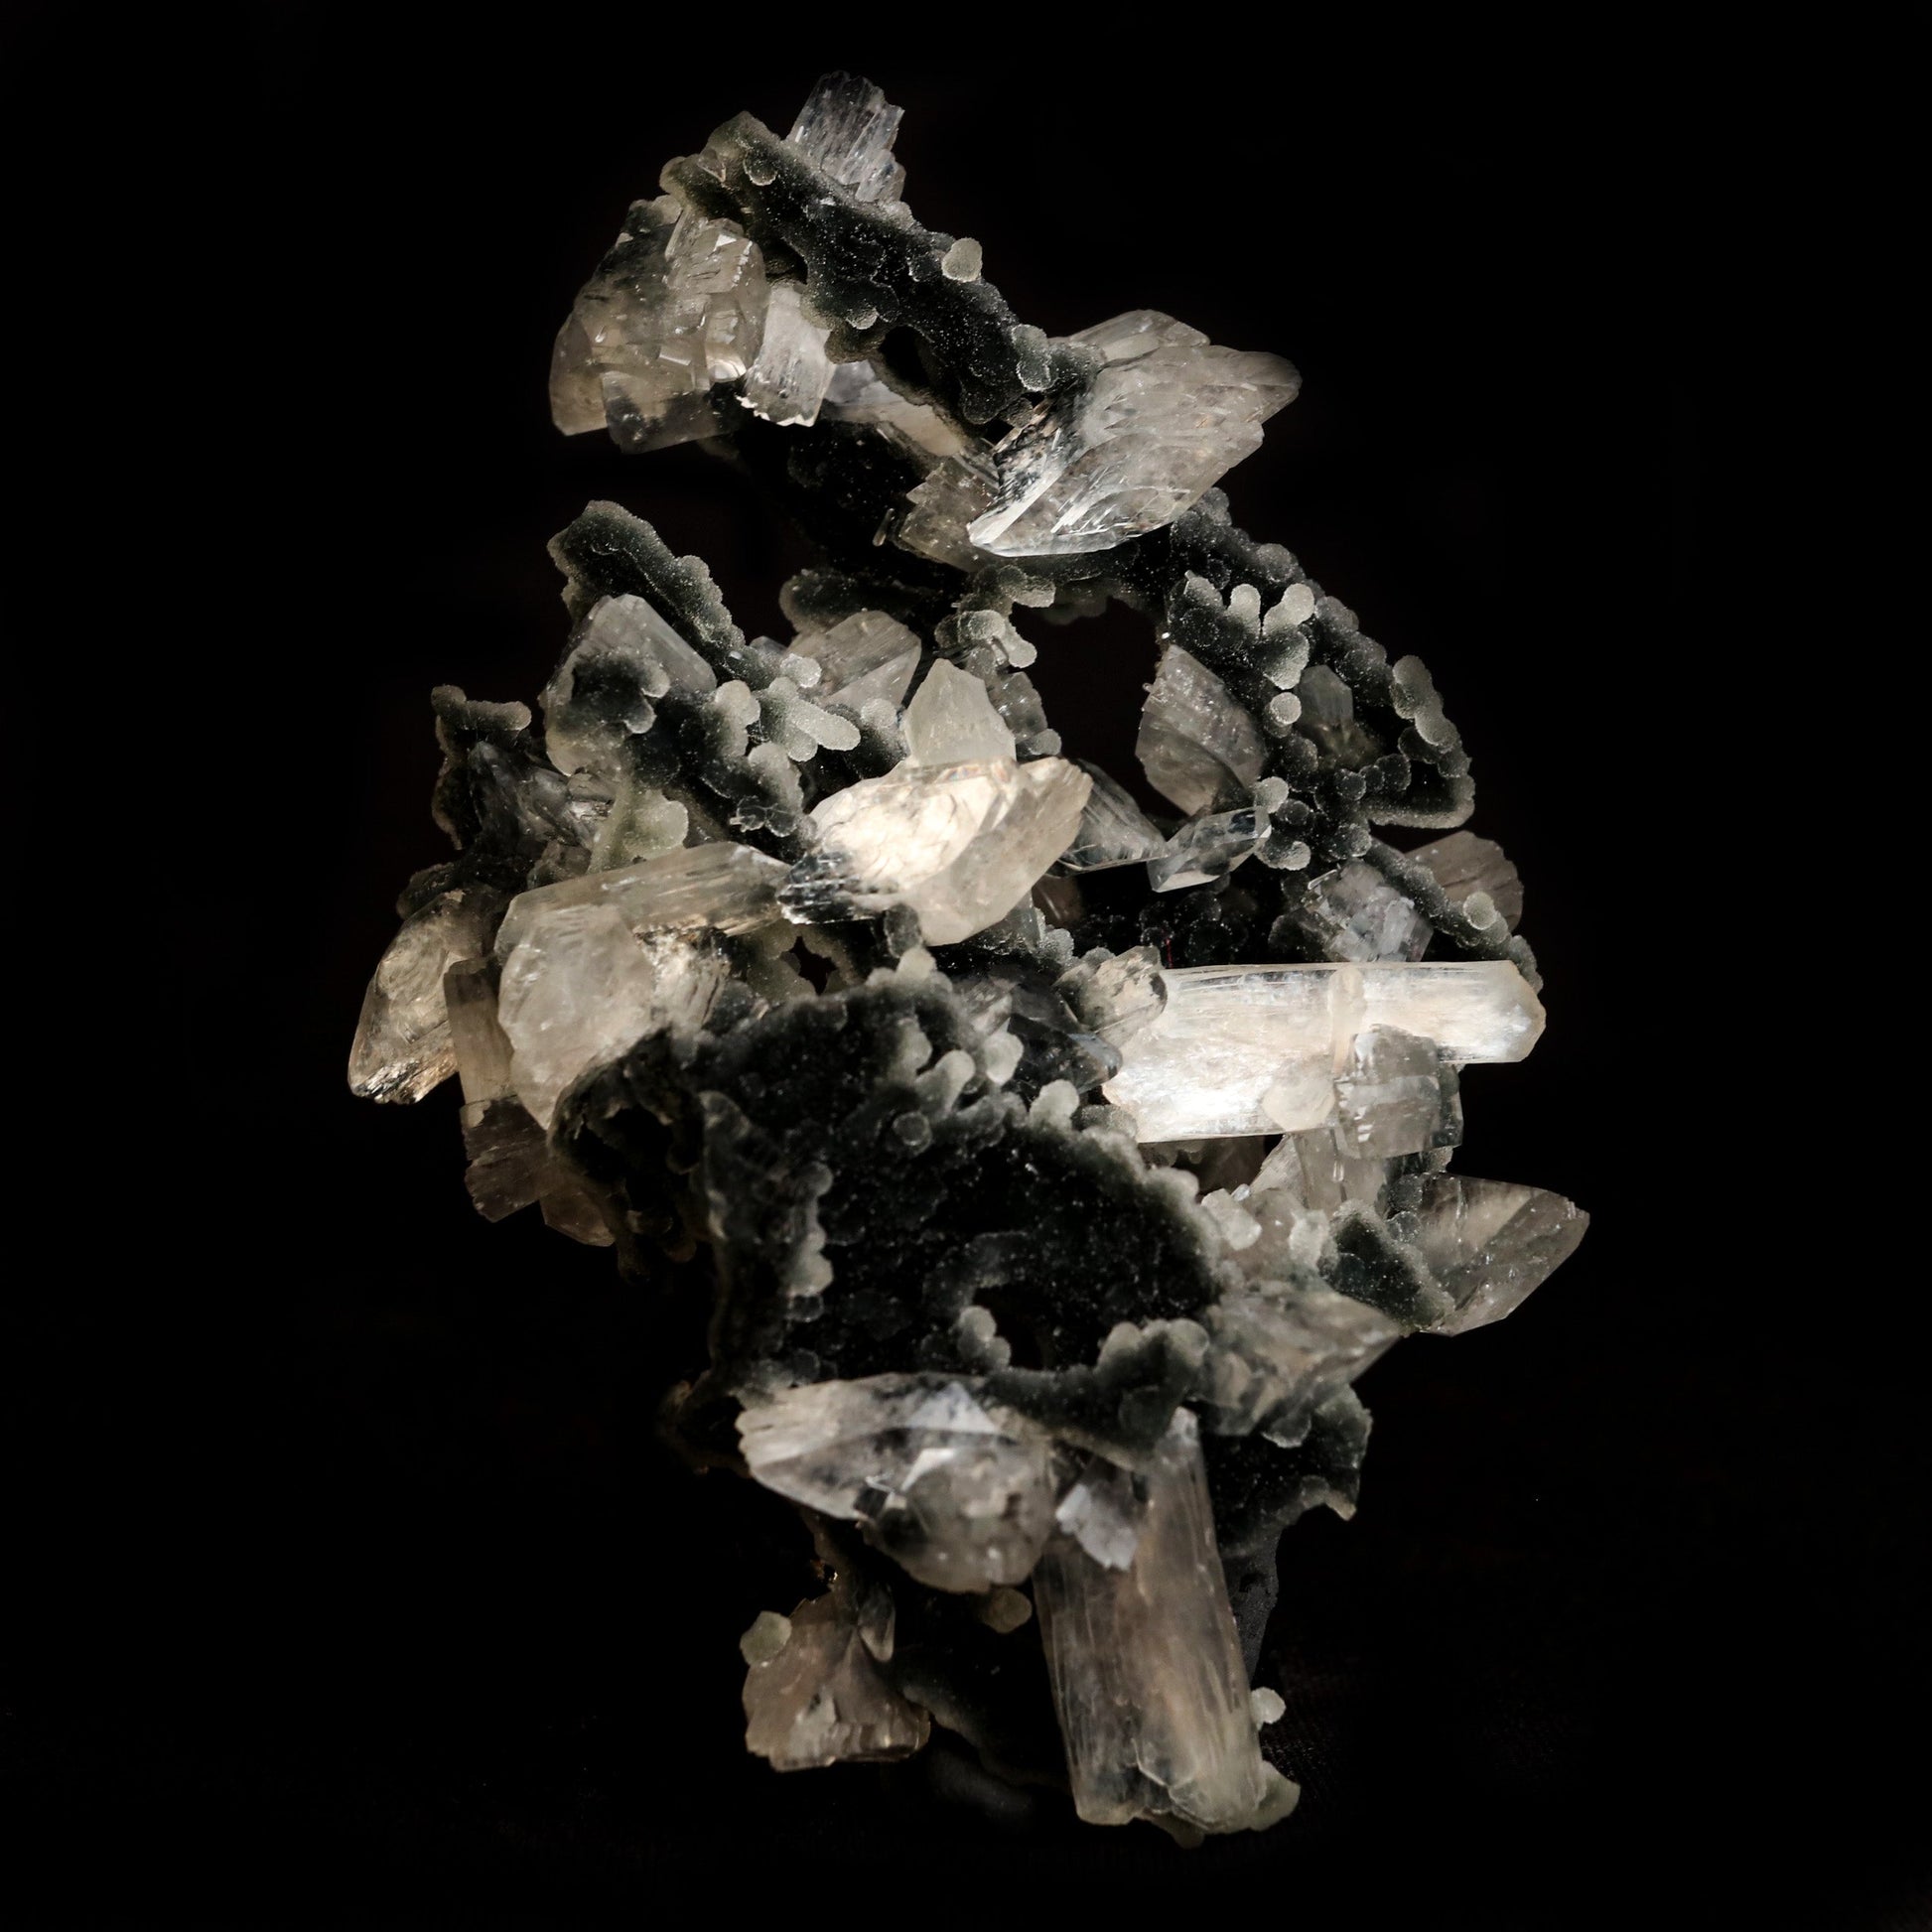 Black Chalcedony with Stilbite Heulandite Natural Mineral Specimen # …  https://www.superbminerals.us/products/black-chalcedony-with-stilbite-heulandite-natural-mineral-specimen-b-5057  Features: Unusual Stilbite from India, exhibiting a transparent, beige crystal with a pearly sheen sitting atop an off-white stalactitic Chalcedony cluster in an aesthetically pleasing display. A one-of-a-kind item in superb condition. Primary Mineral(s): Stilbite